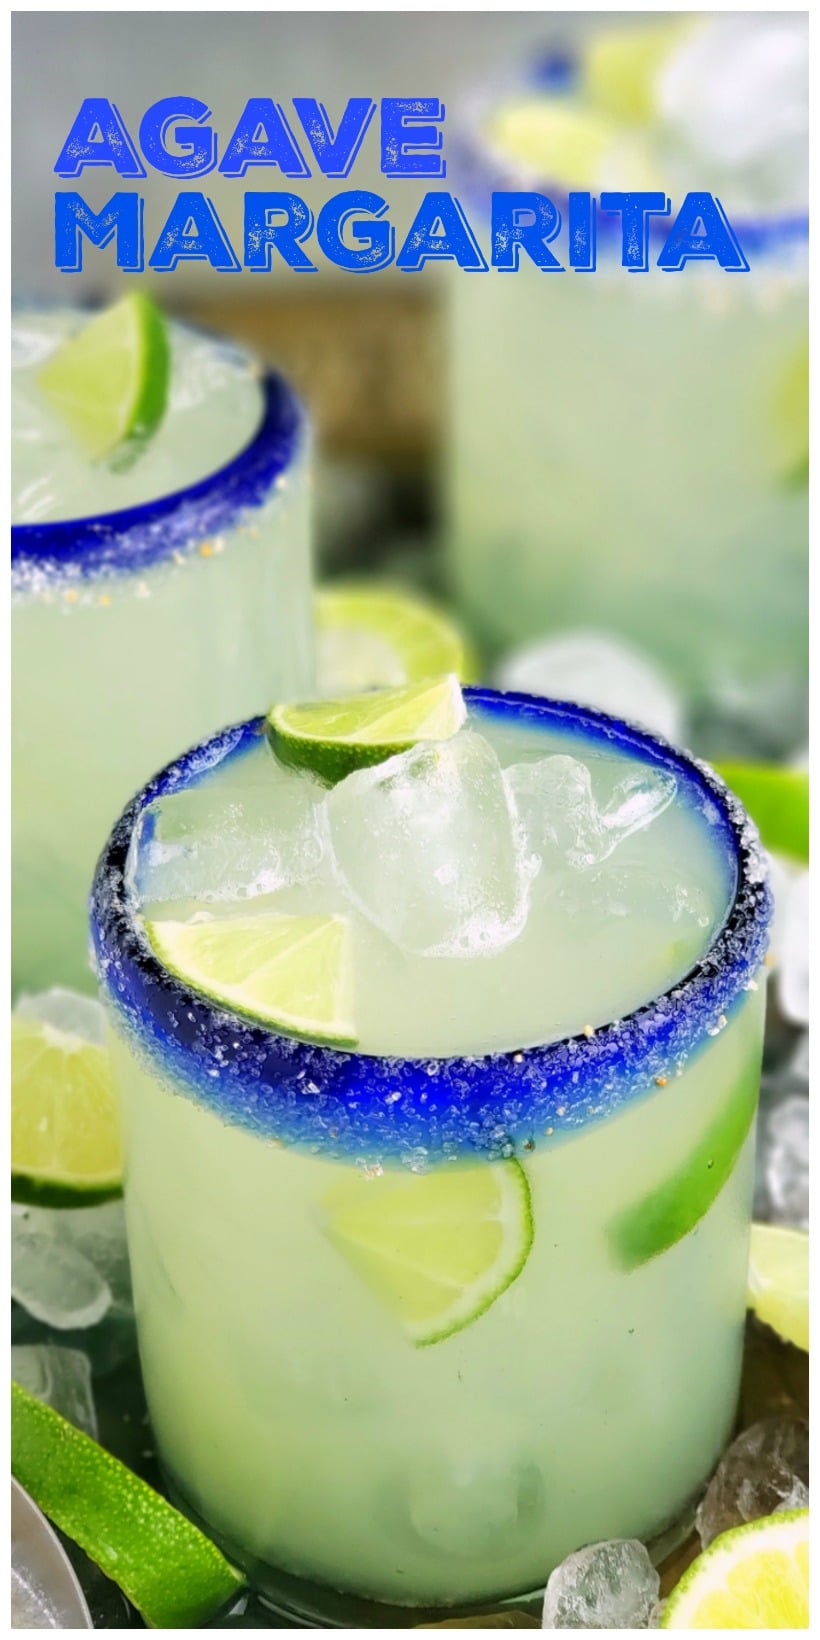 Three ingredients is all you need to make this outstanding margarita with agave as its sweetener. Perfectly balanced and refreshing, this agave margarita recipe will be your new favorite patio drink. via @cmpollak1